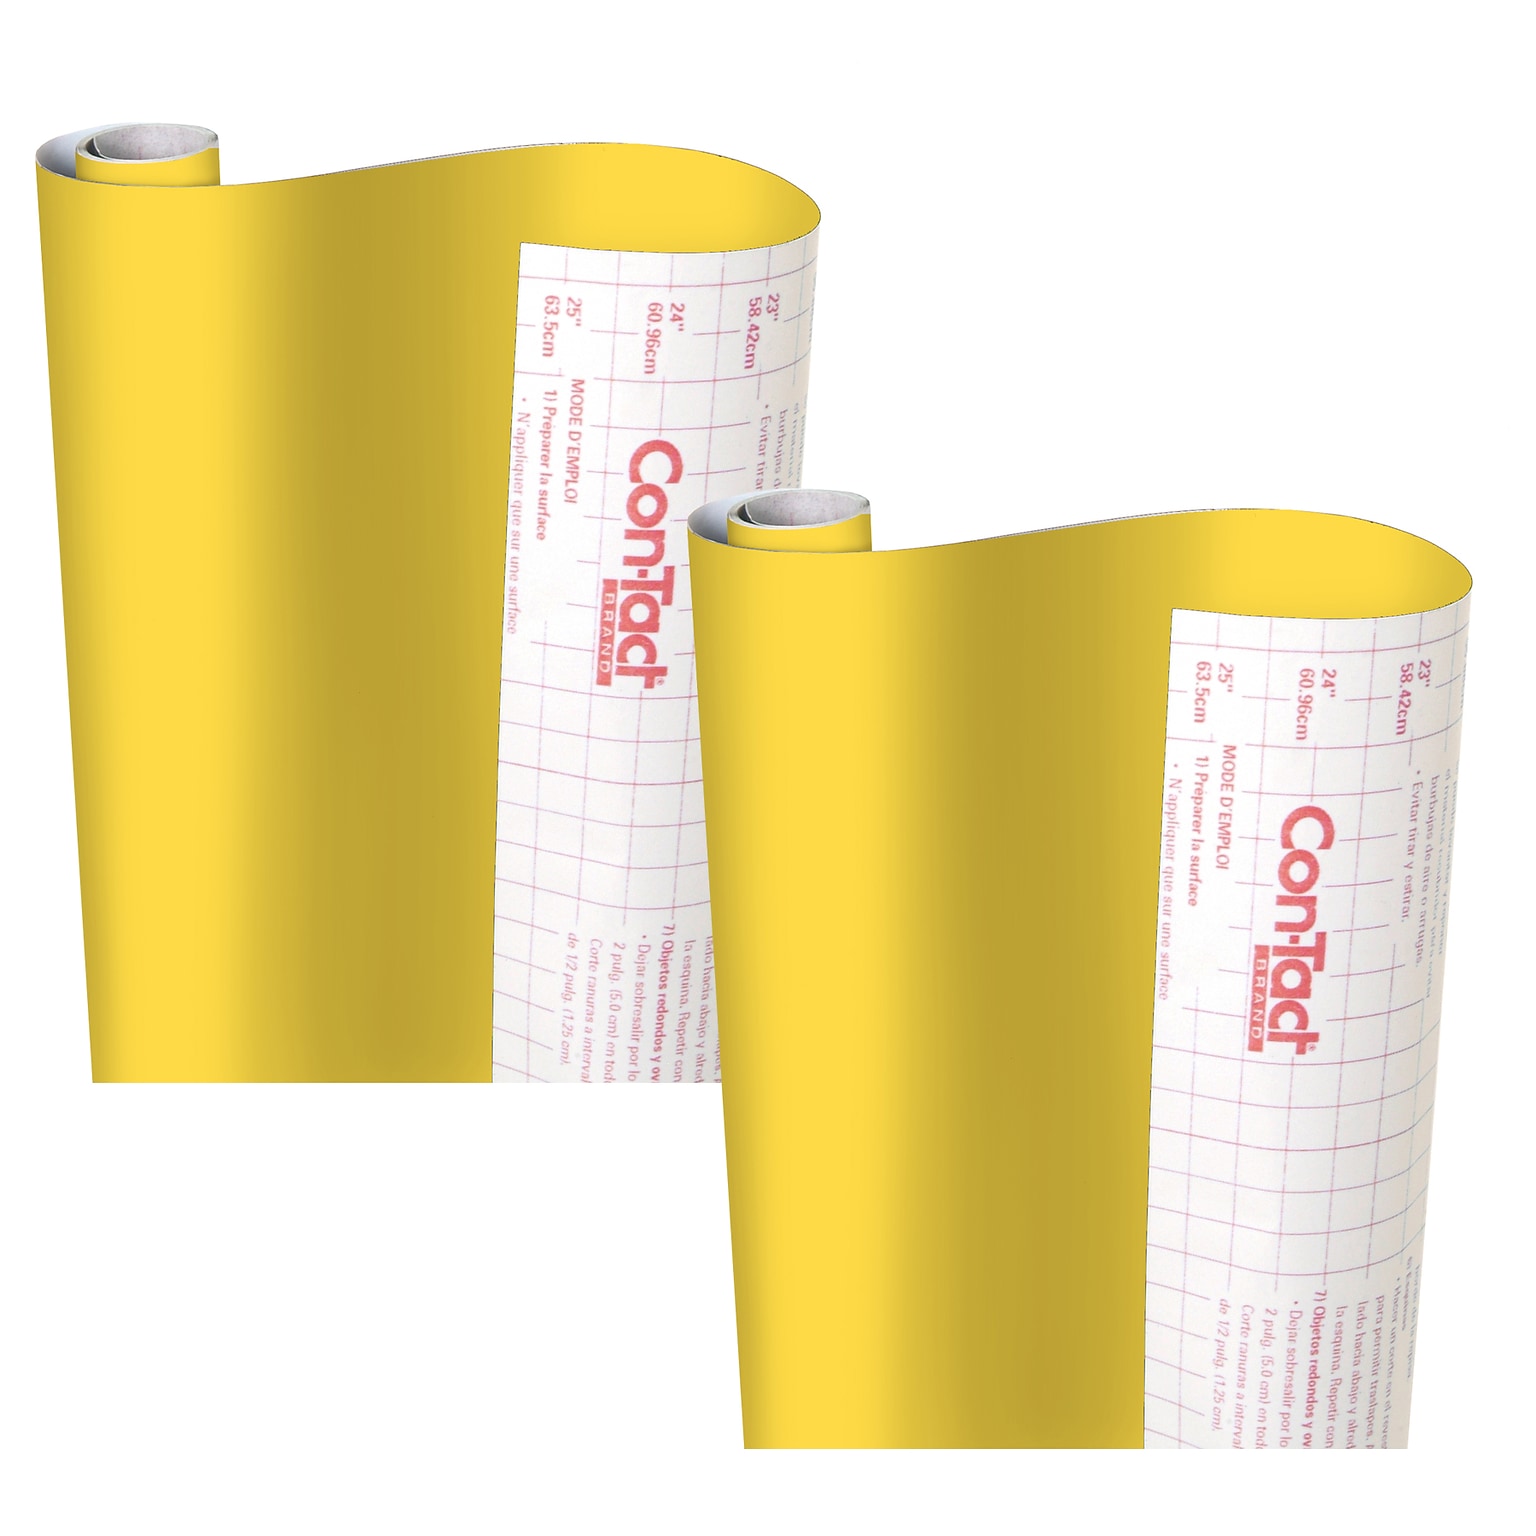 Con-Tact Creative Covering™ Adhesive Covering, 18 x 16 Per Roll, Yellow, 2 Rolls (KIT16FC9AH2206-2)